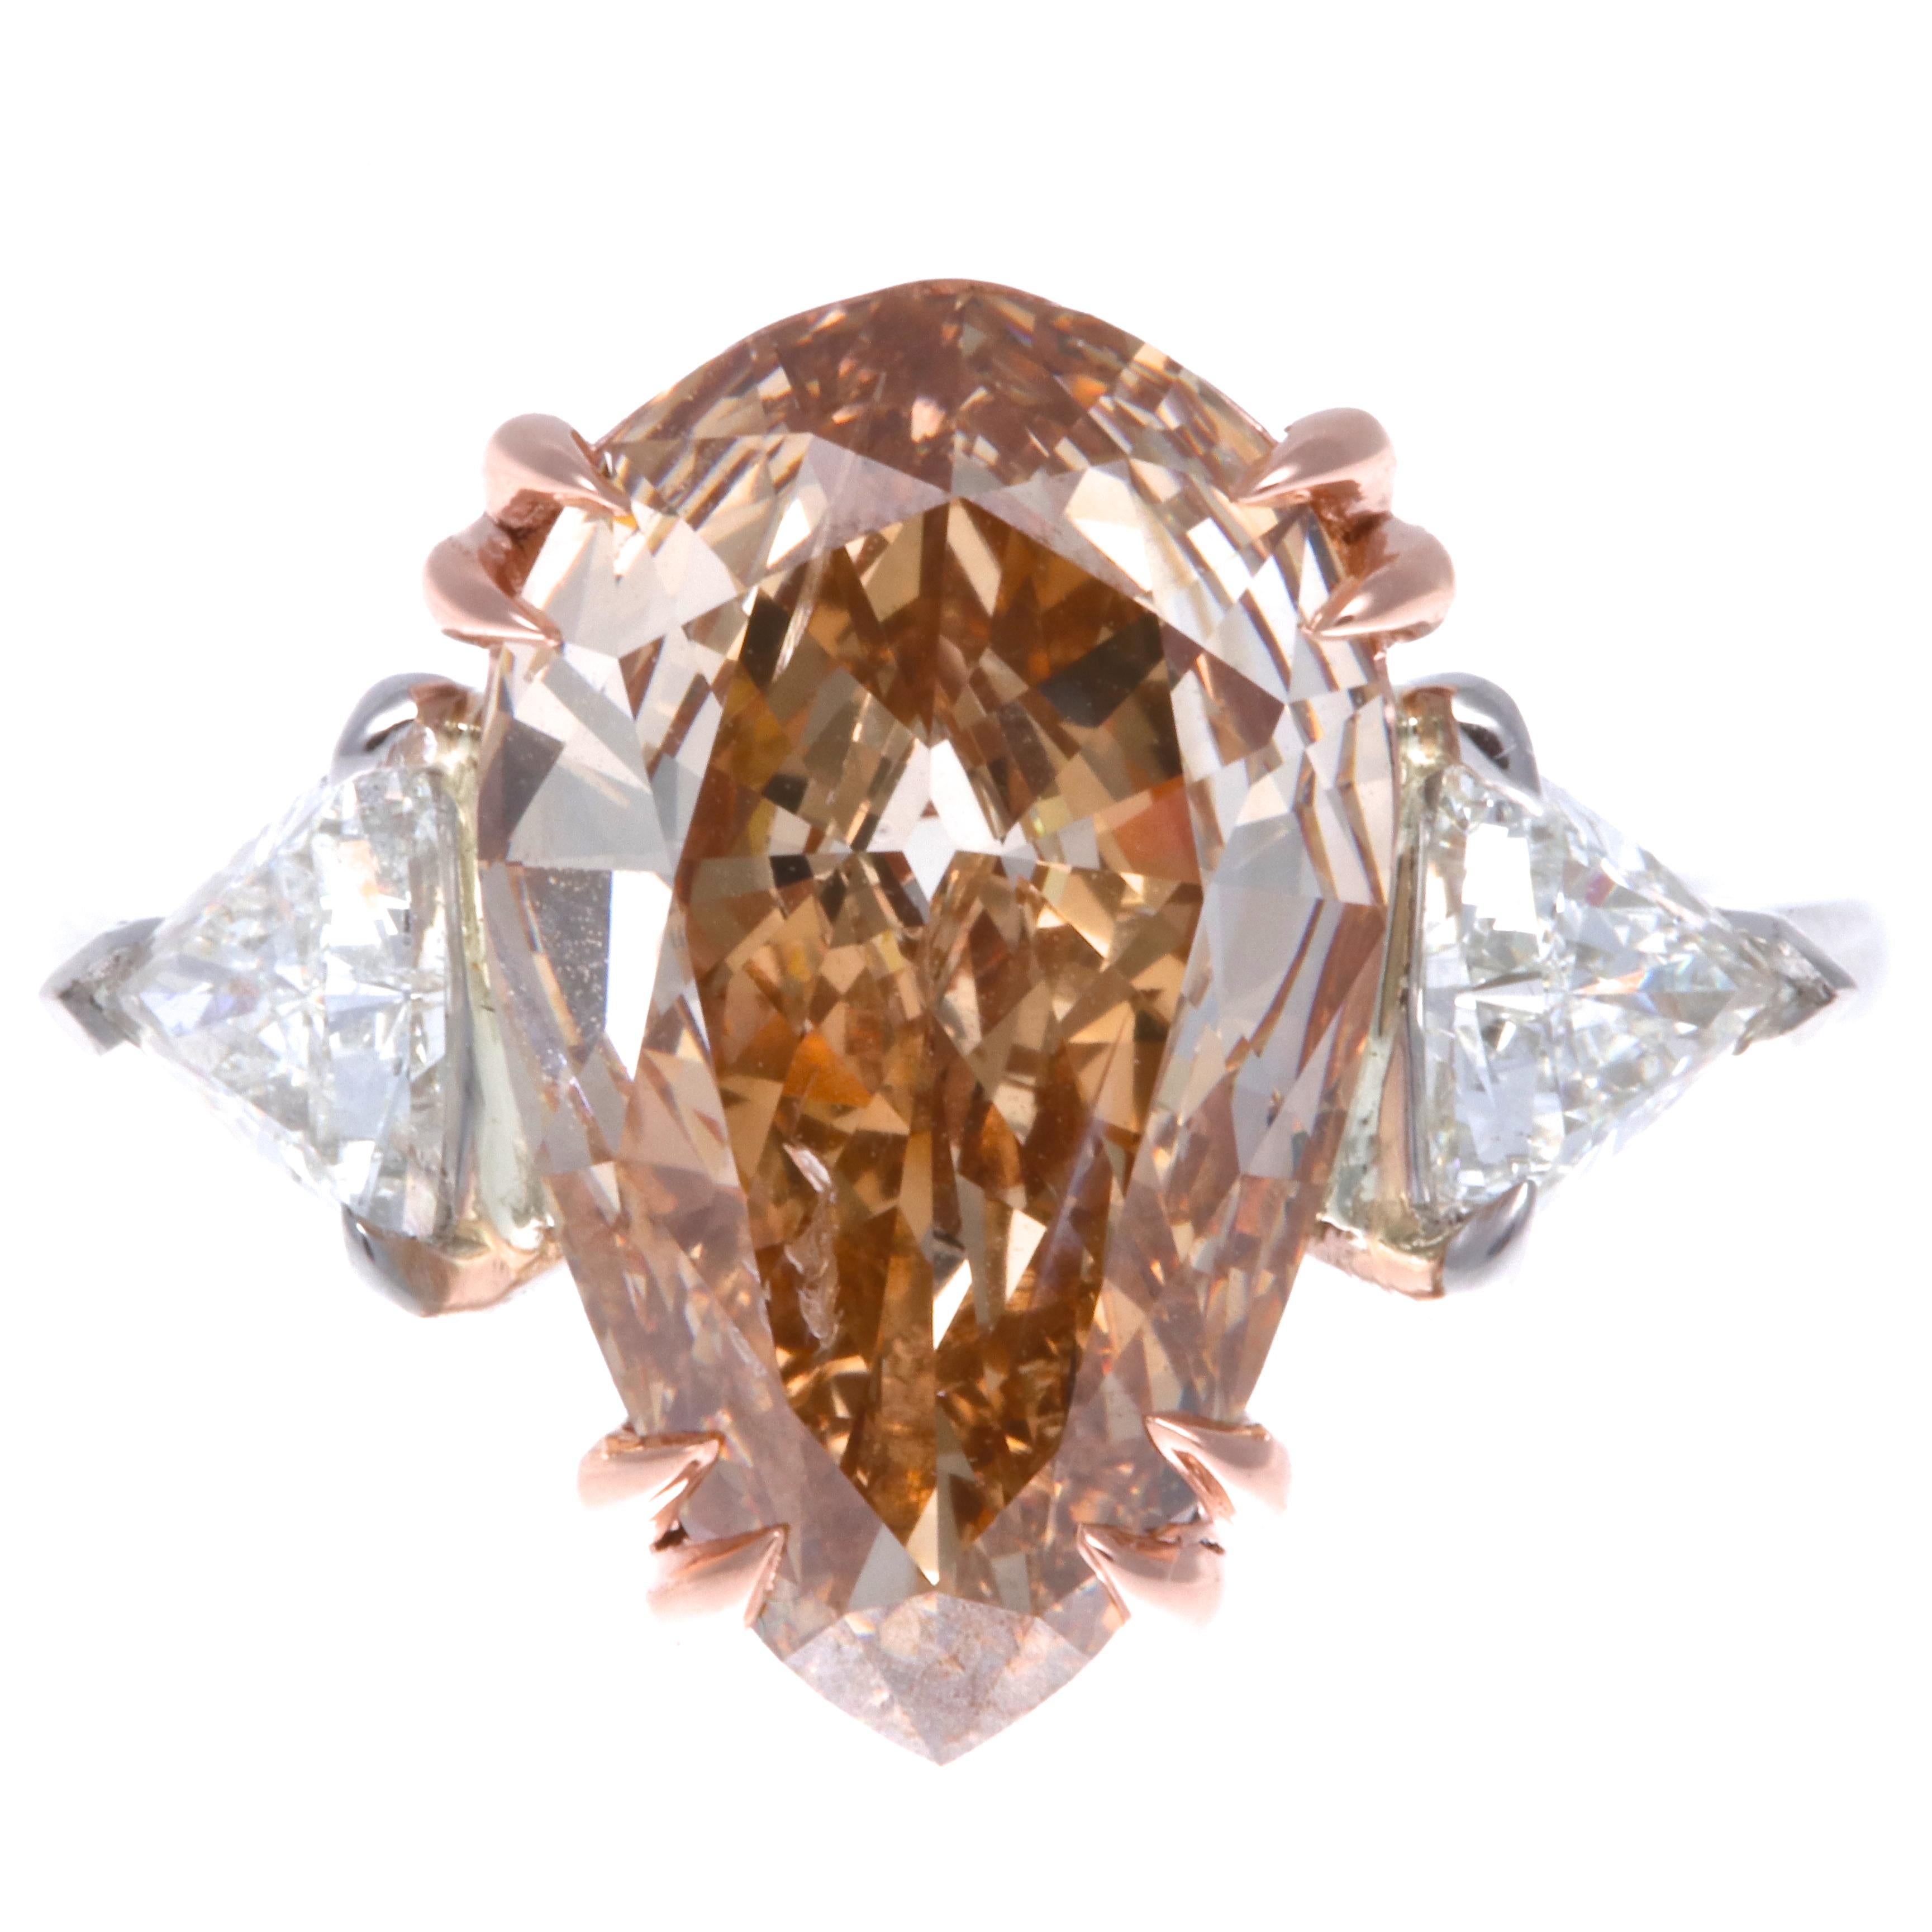 An engagement ring that no one else has! This one of a kind modern diamond platinum ring features a GIA certified fancy orange-brown pear shape diamond 4.37 carats set in rose gold.  Flanked by two trillion cut diamonds, 0.75 carats G,H color VS2